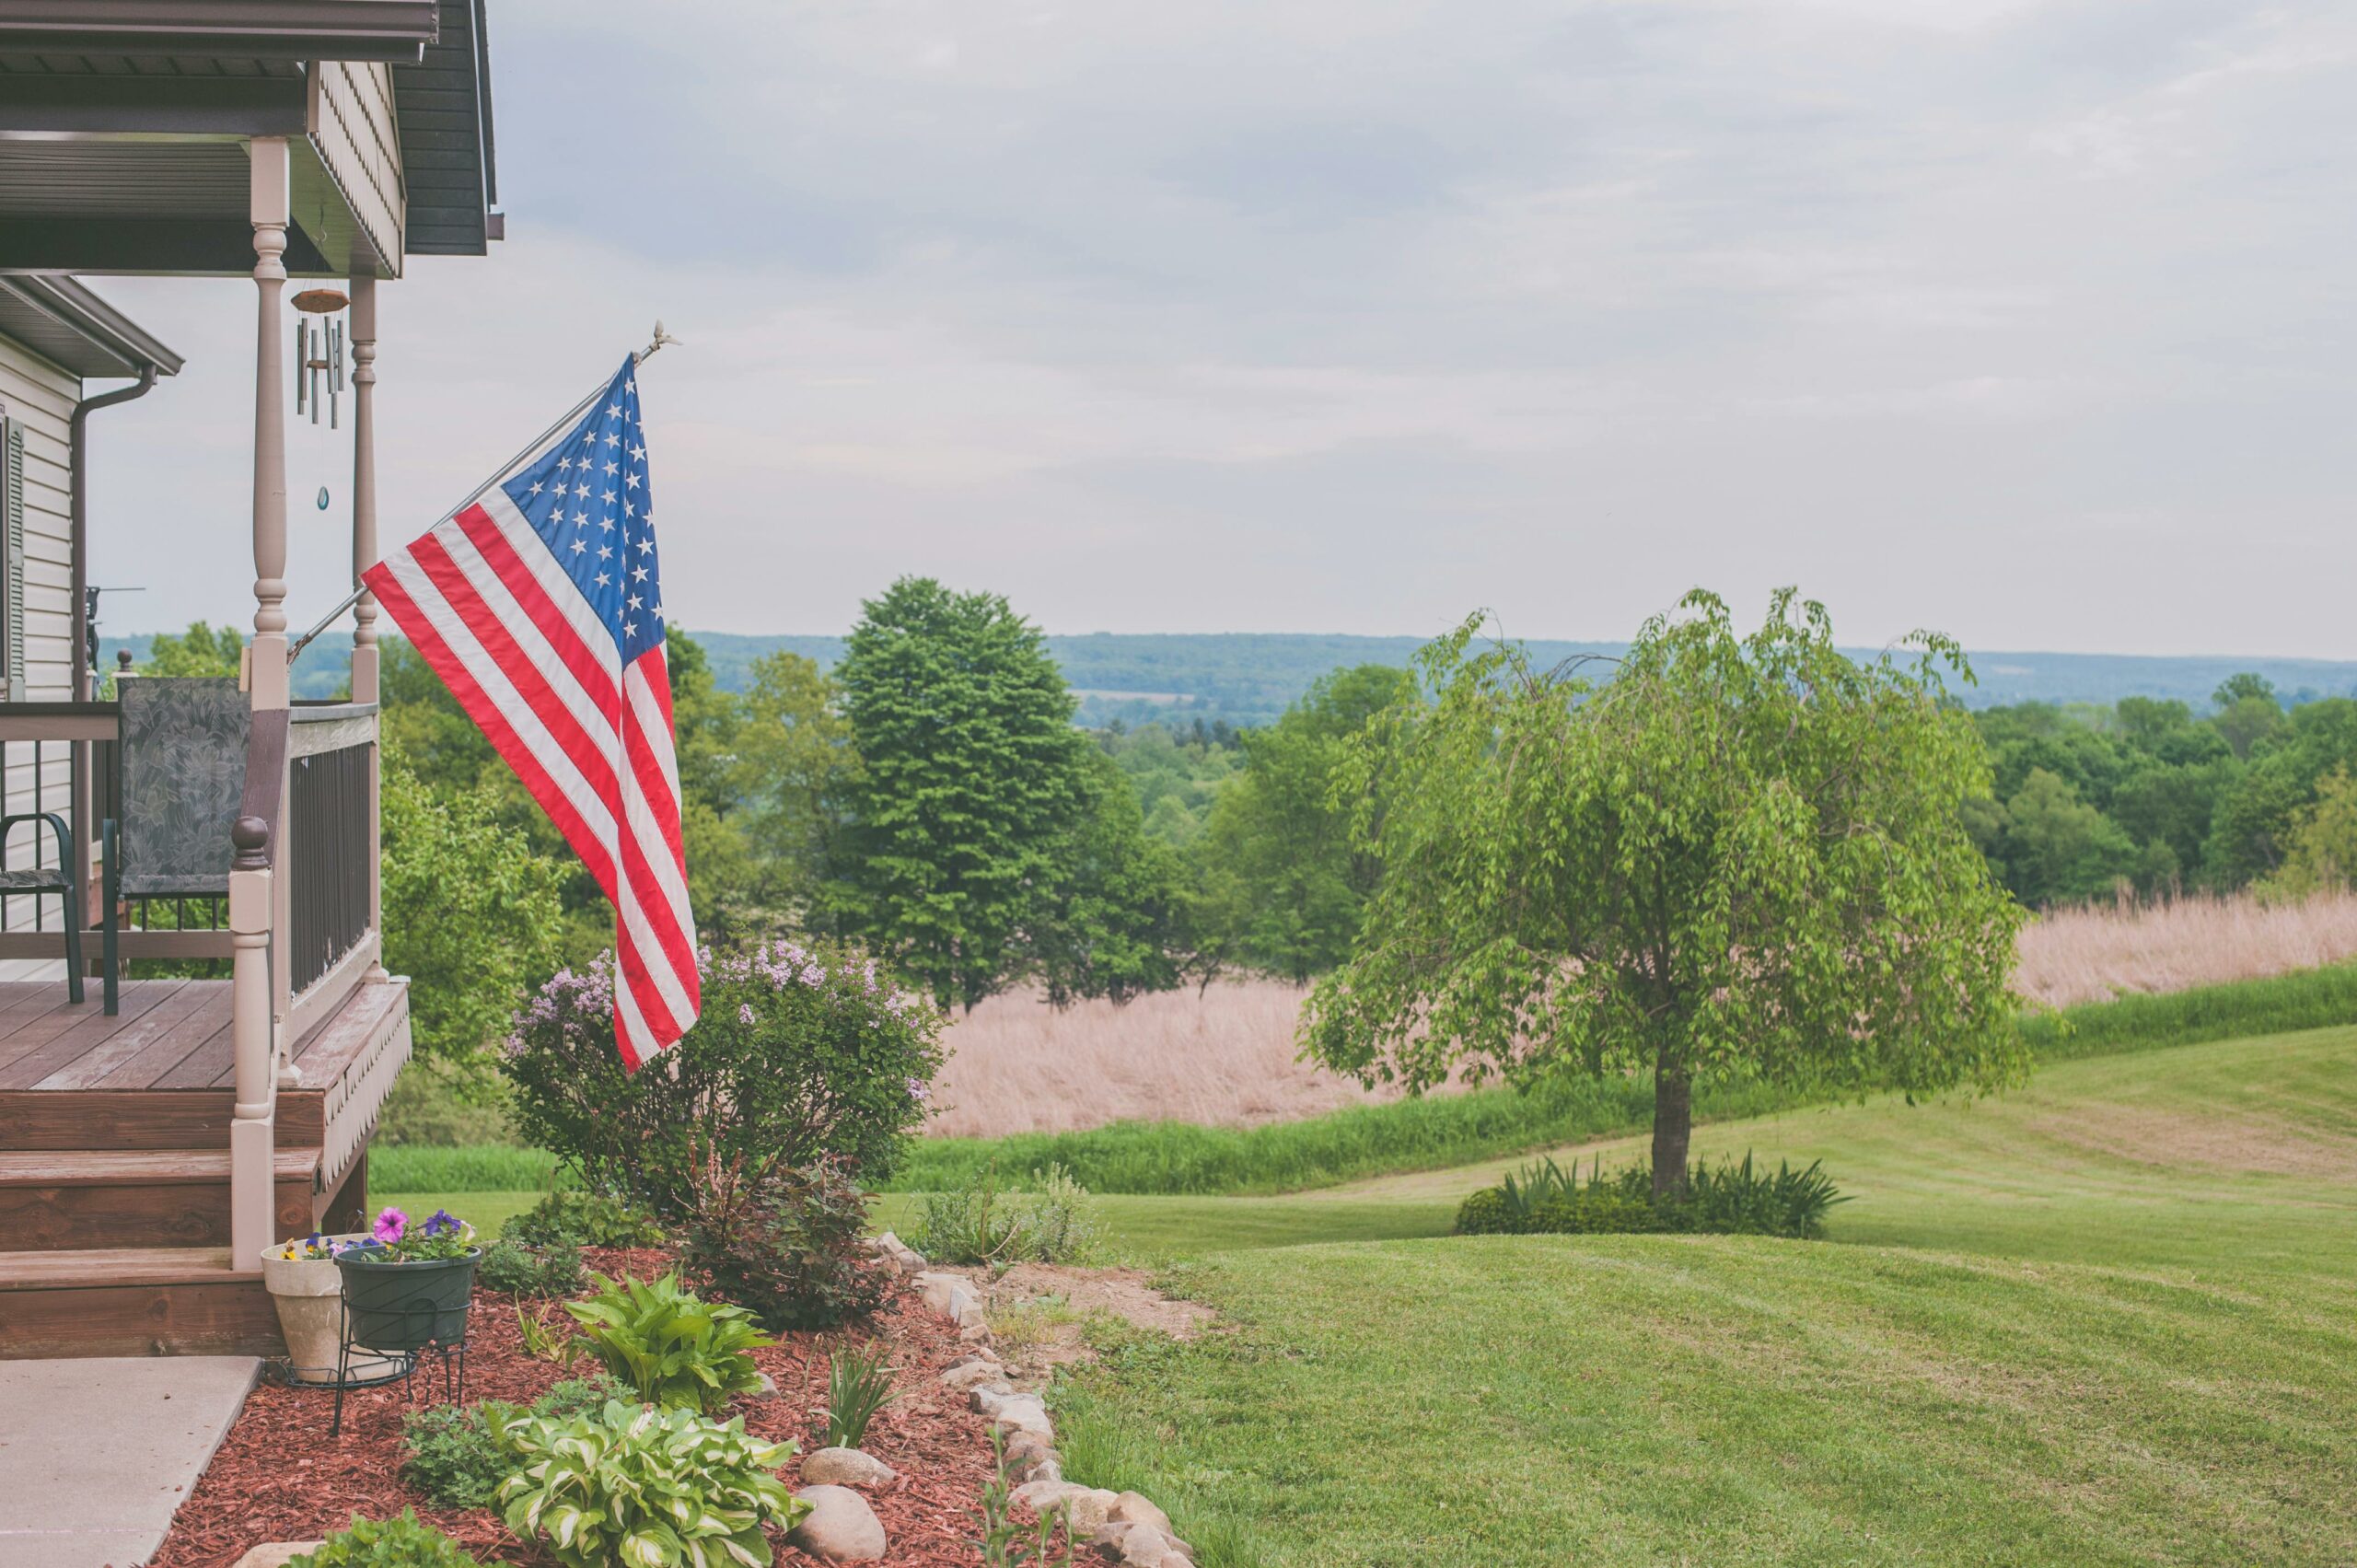 American flag on the porch in a country setting